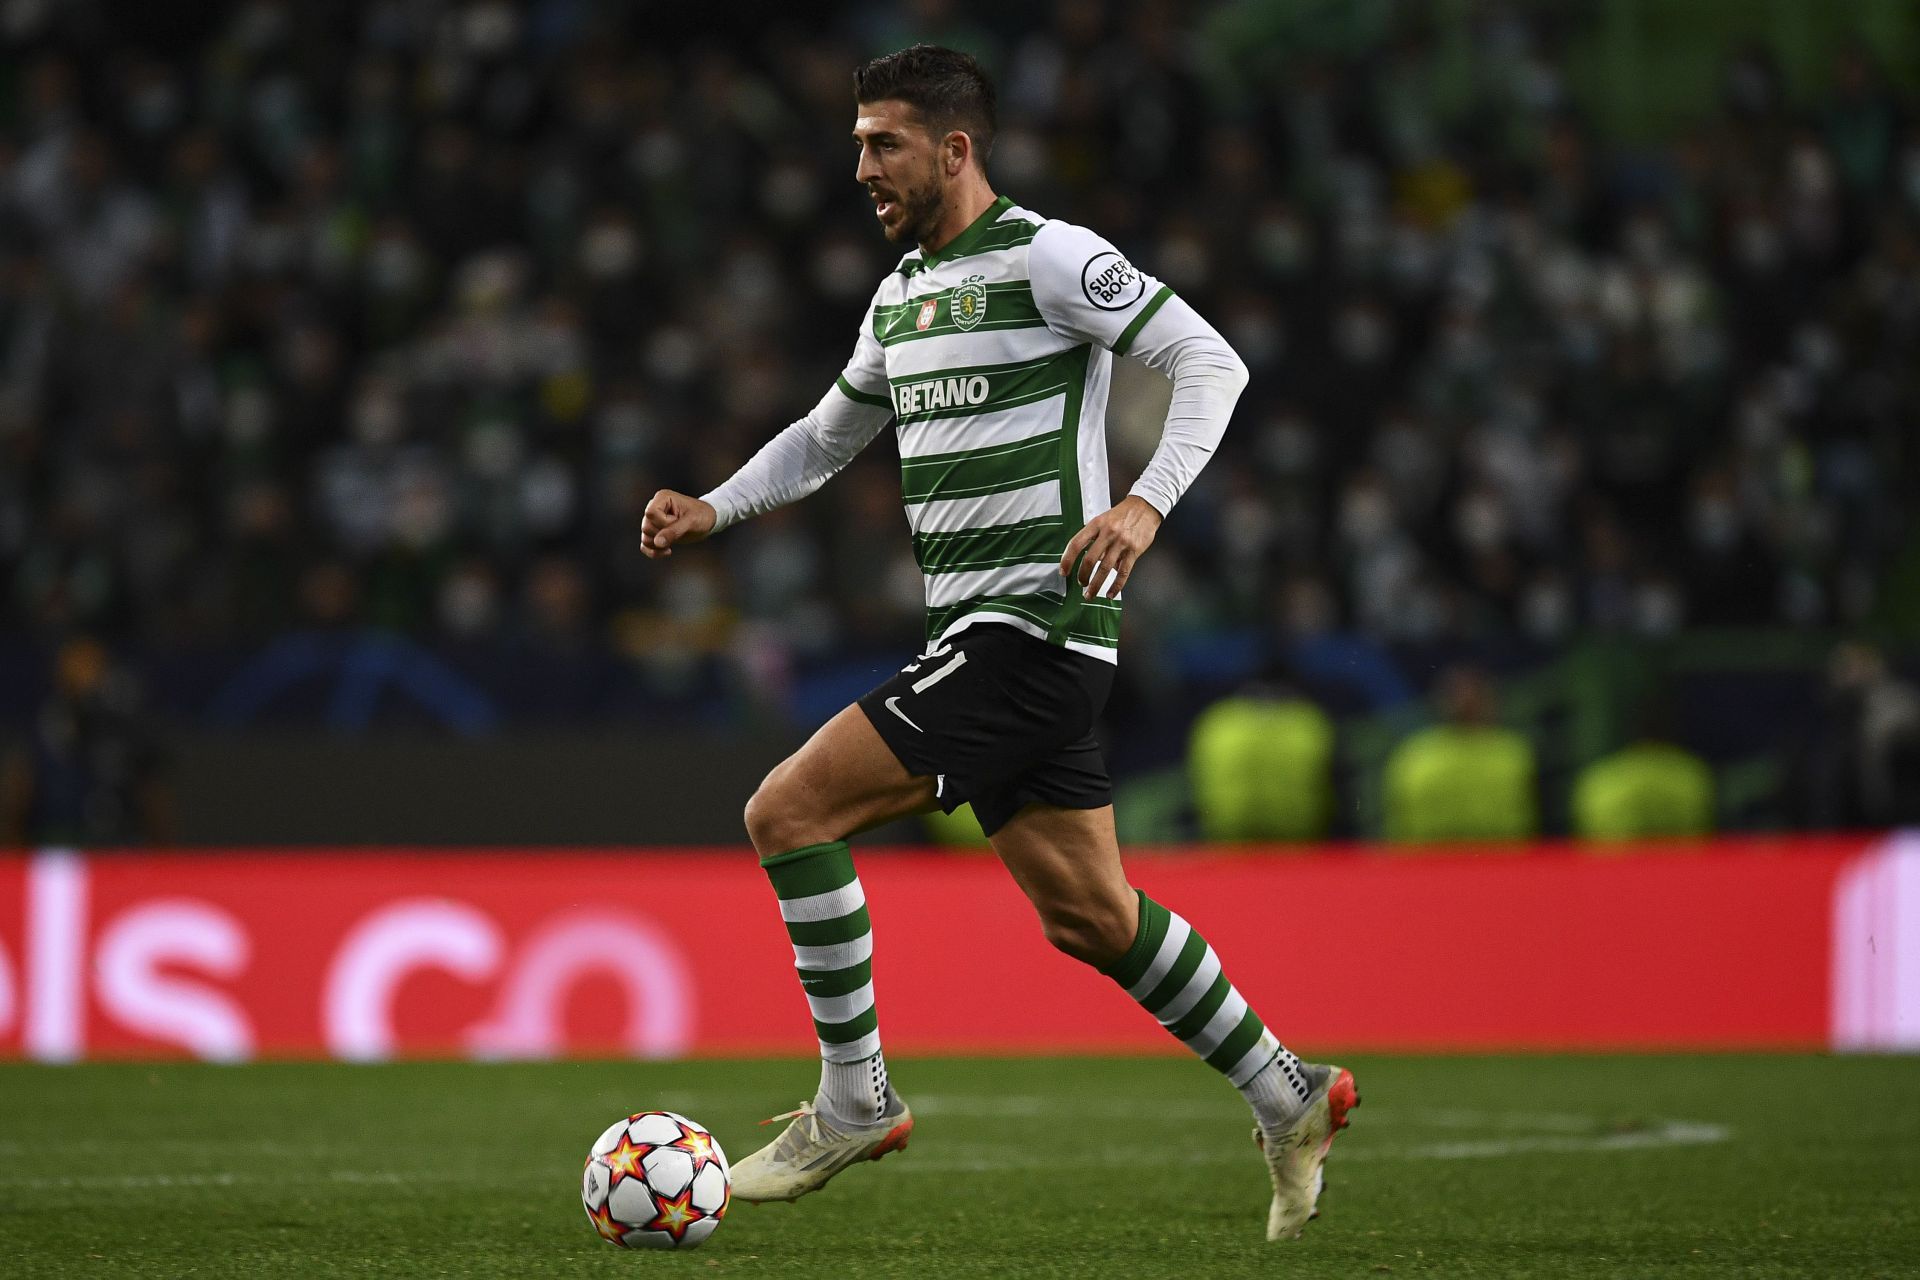 Sporting suffered their first defeat of the Portuguese Primeira Liga in their previous outing